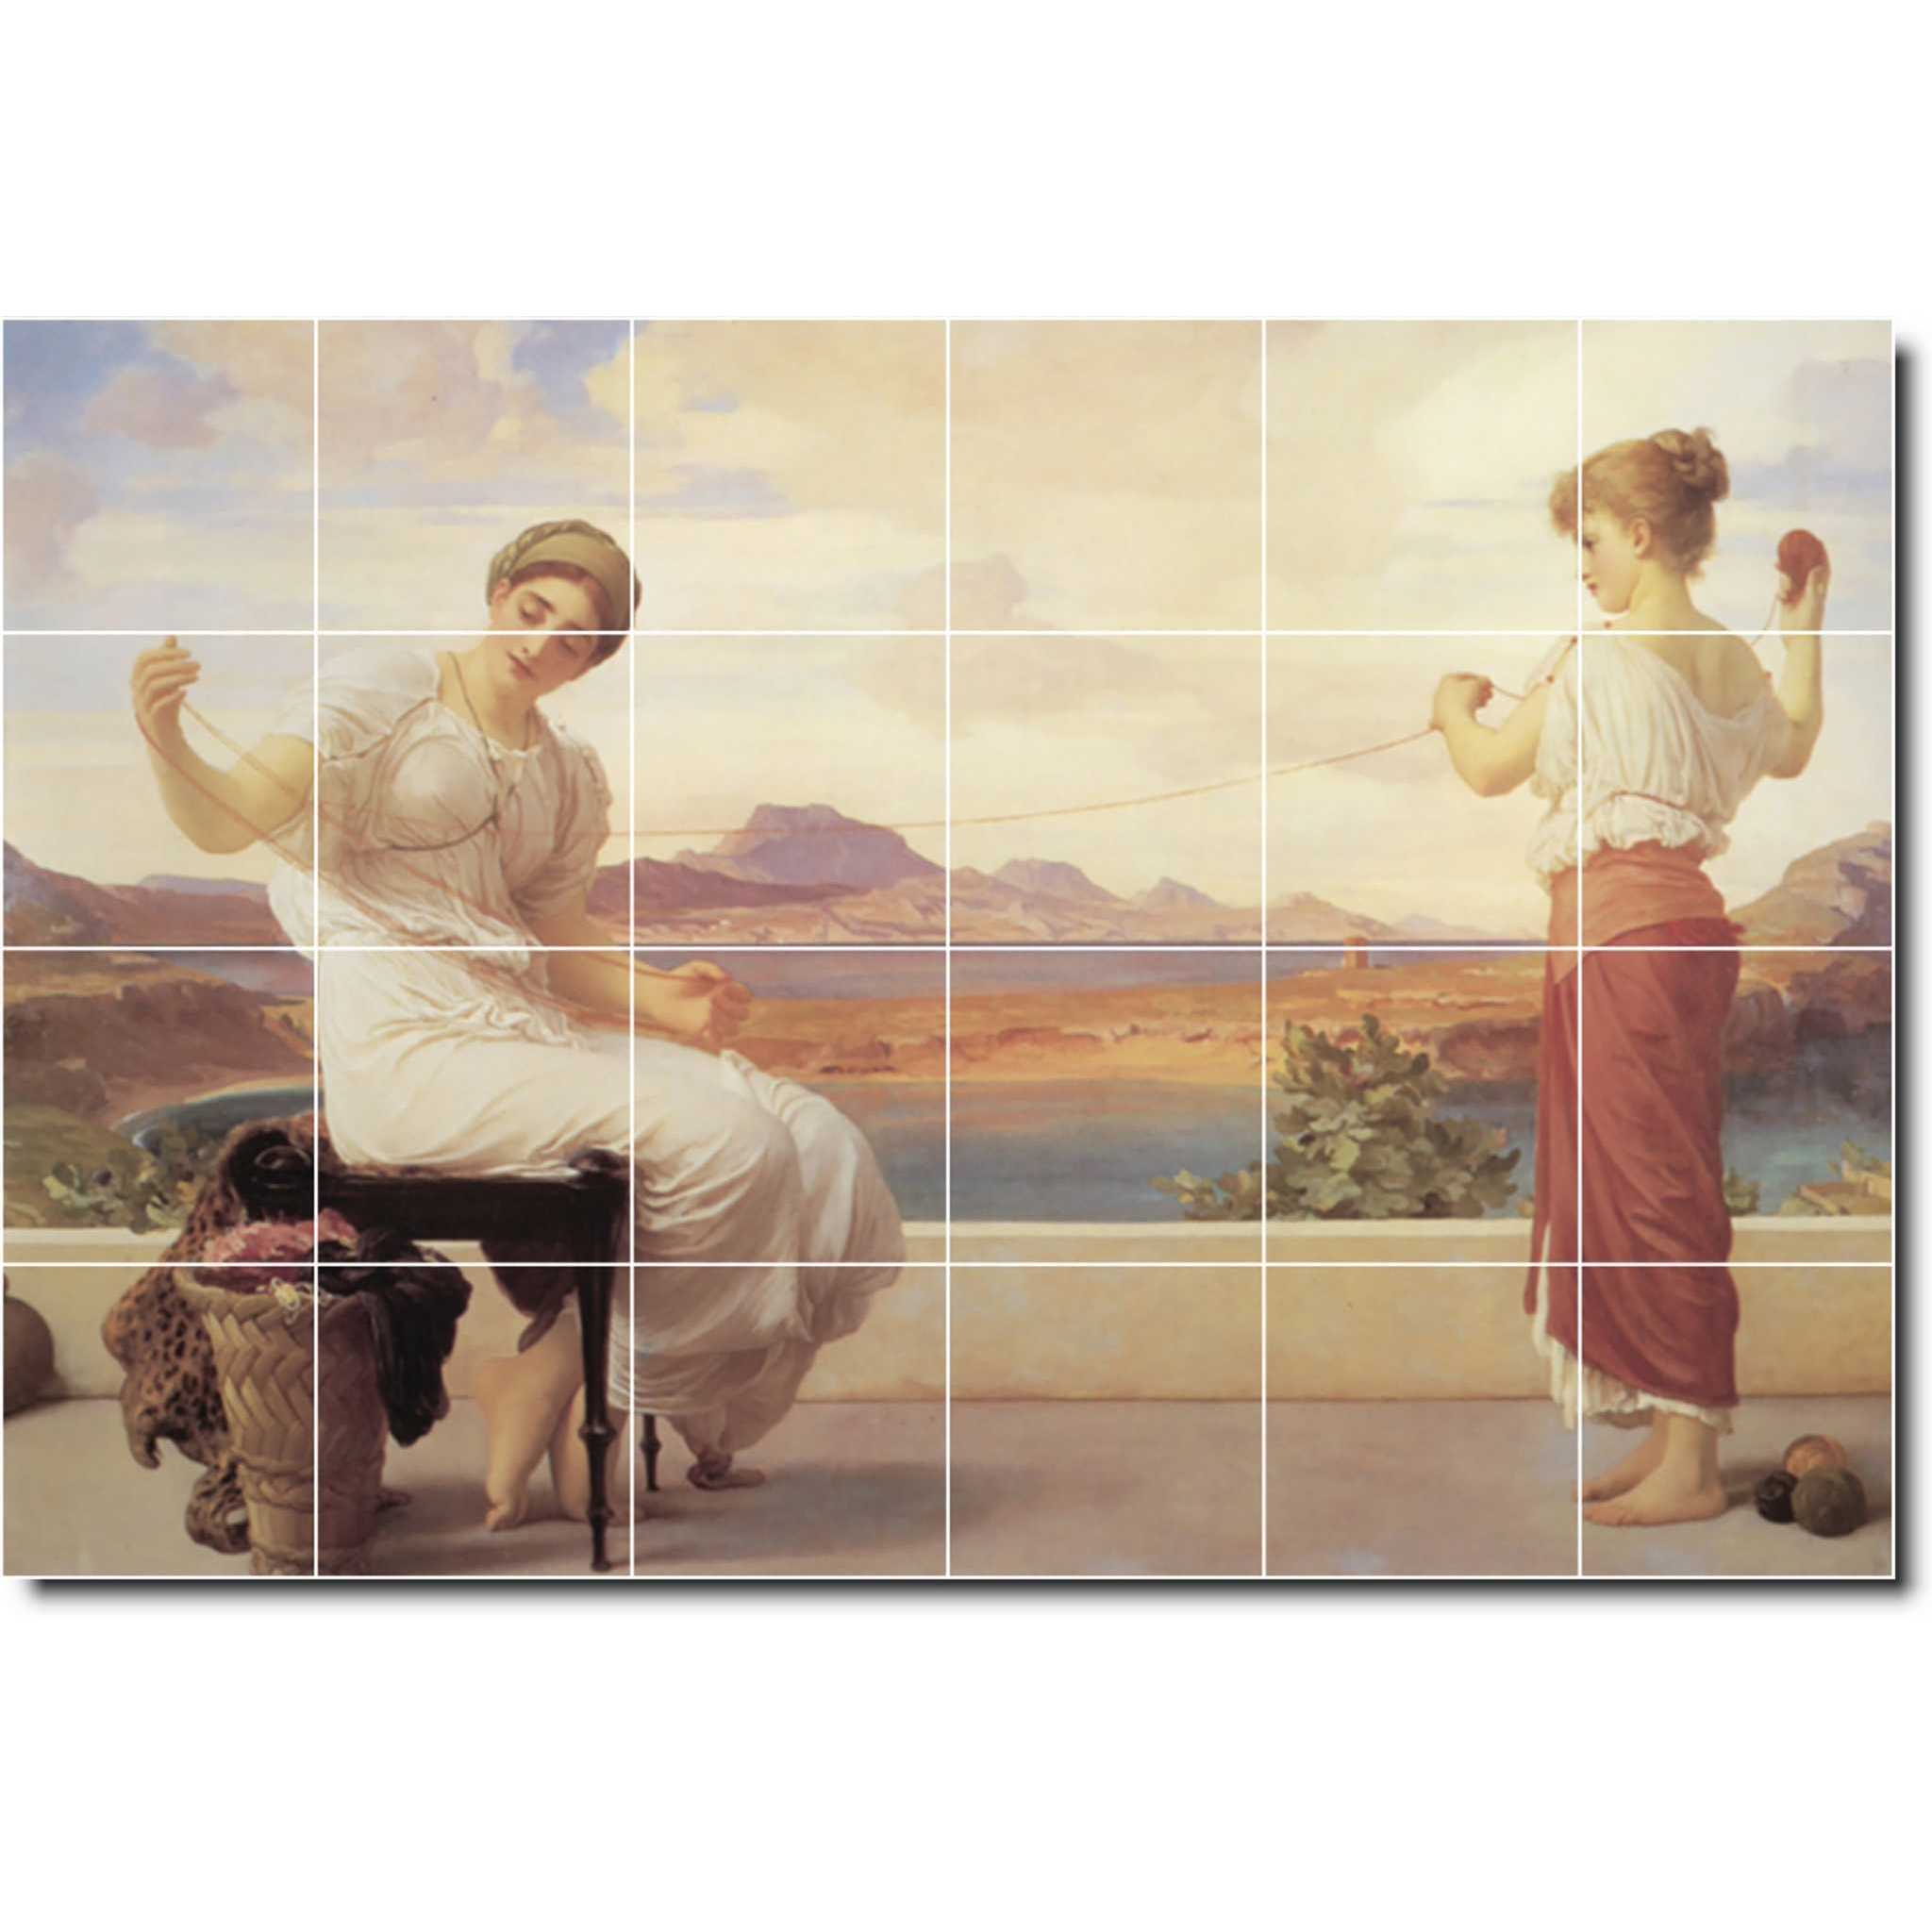 frederick leighton mother child painting ceramic tile mural p05430